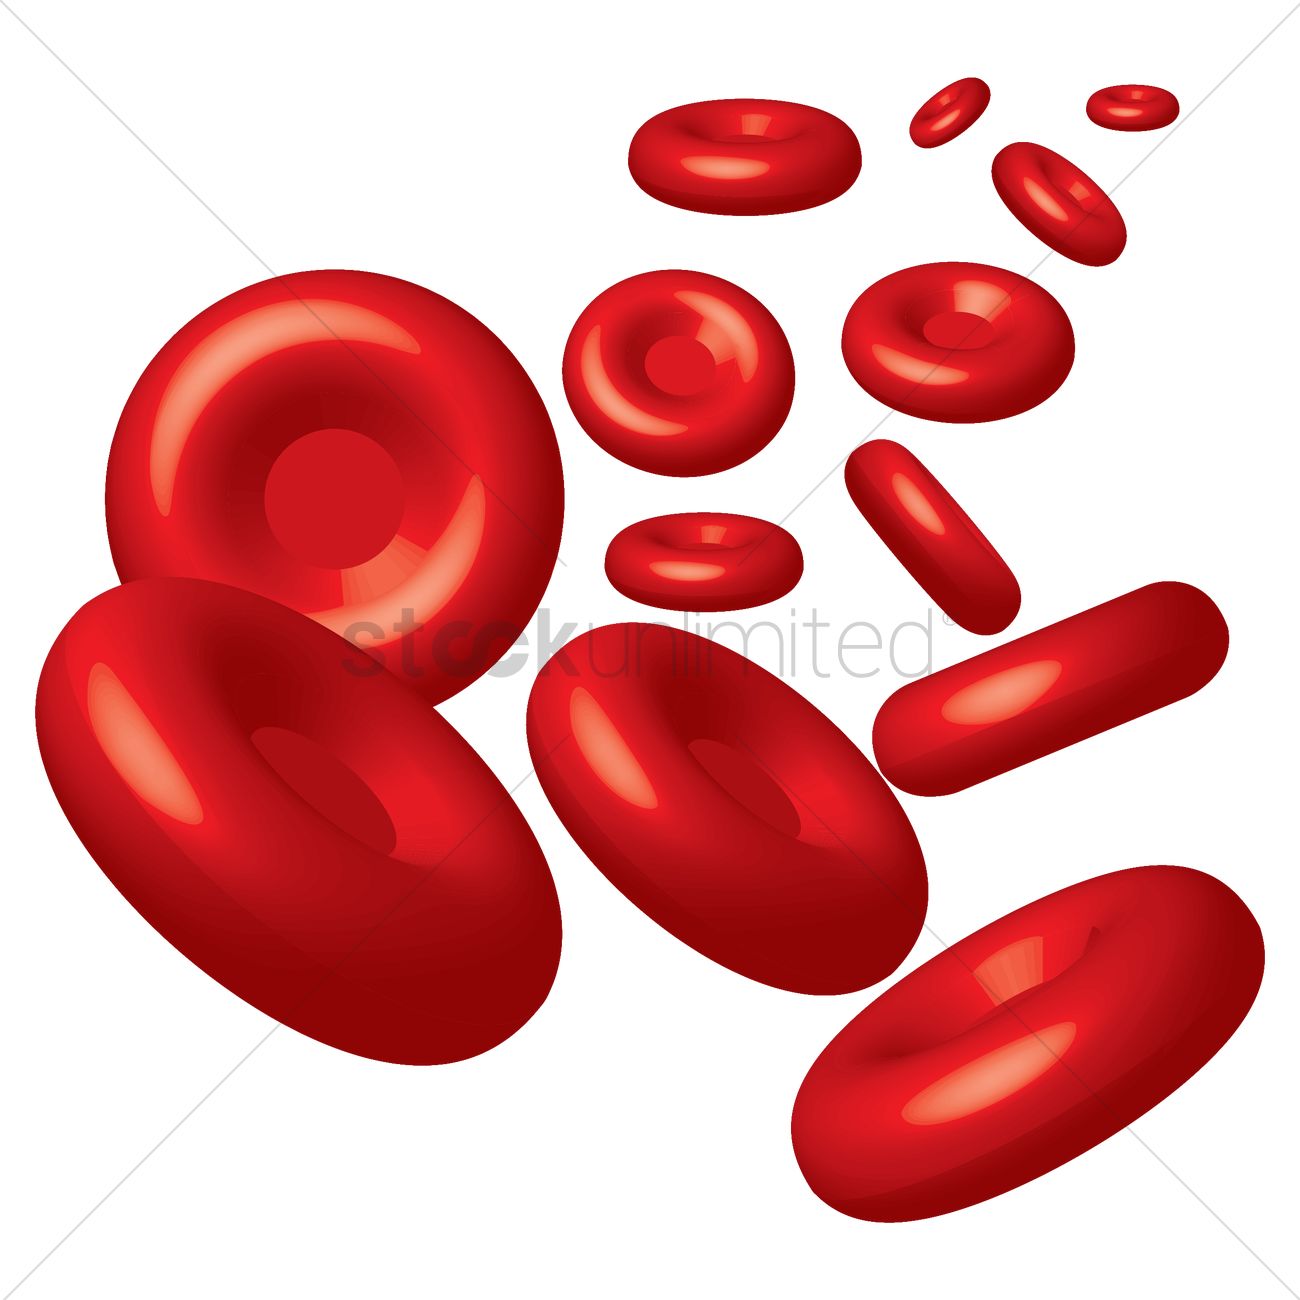 File:Red blood cell.png